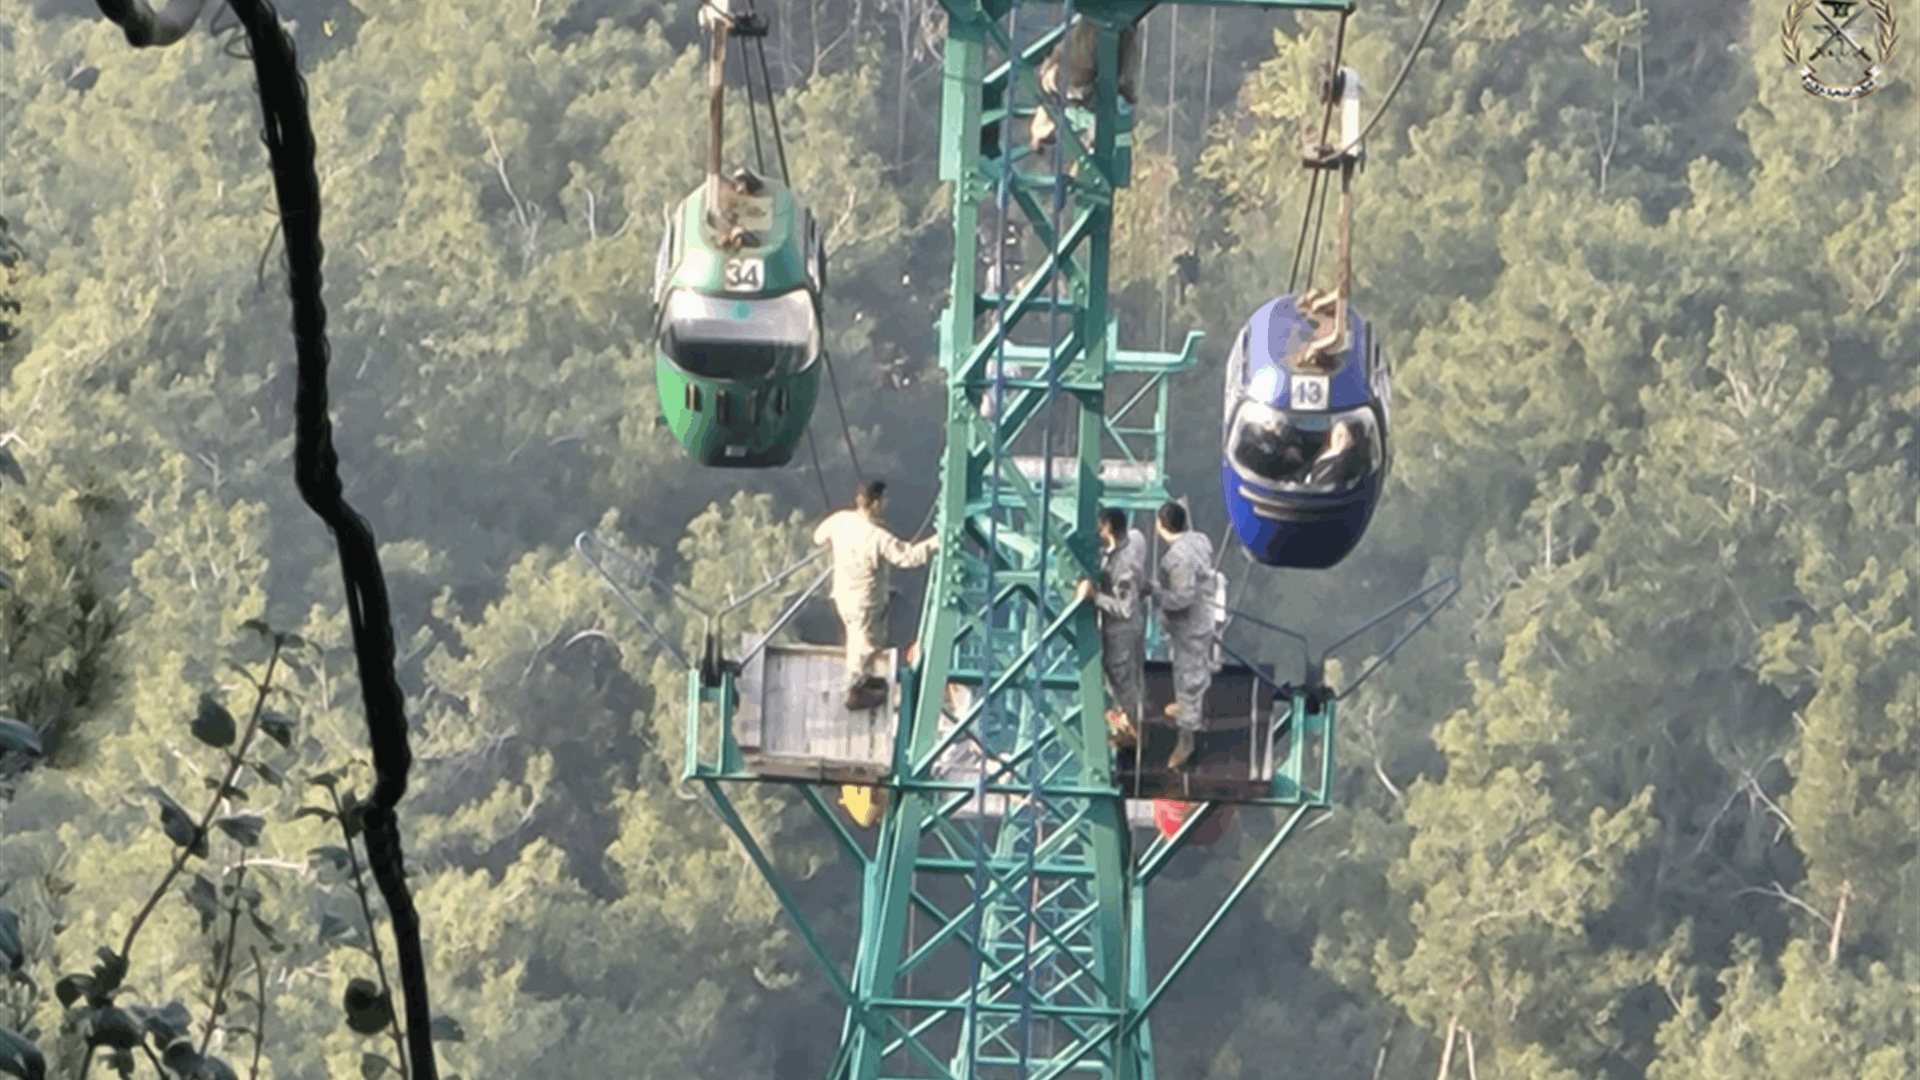 Rescue efforts: Cable car collision in Lebanon due to mechanical malfunction